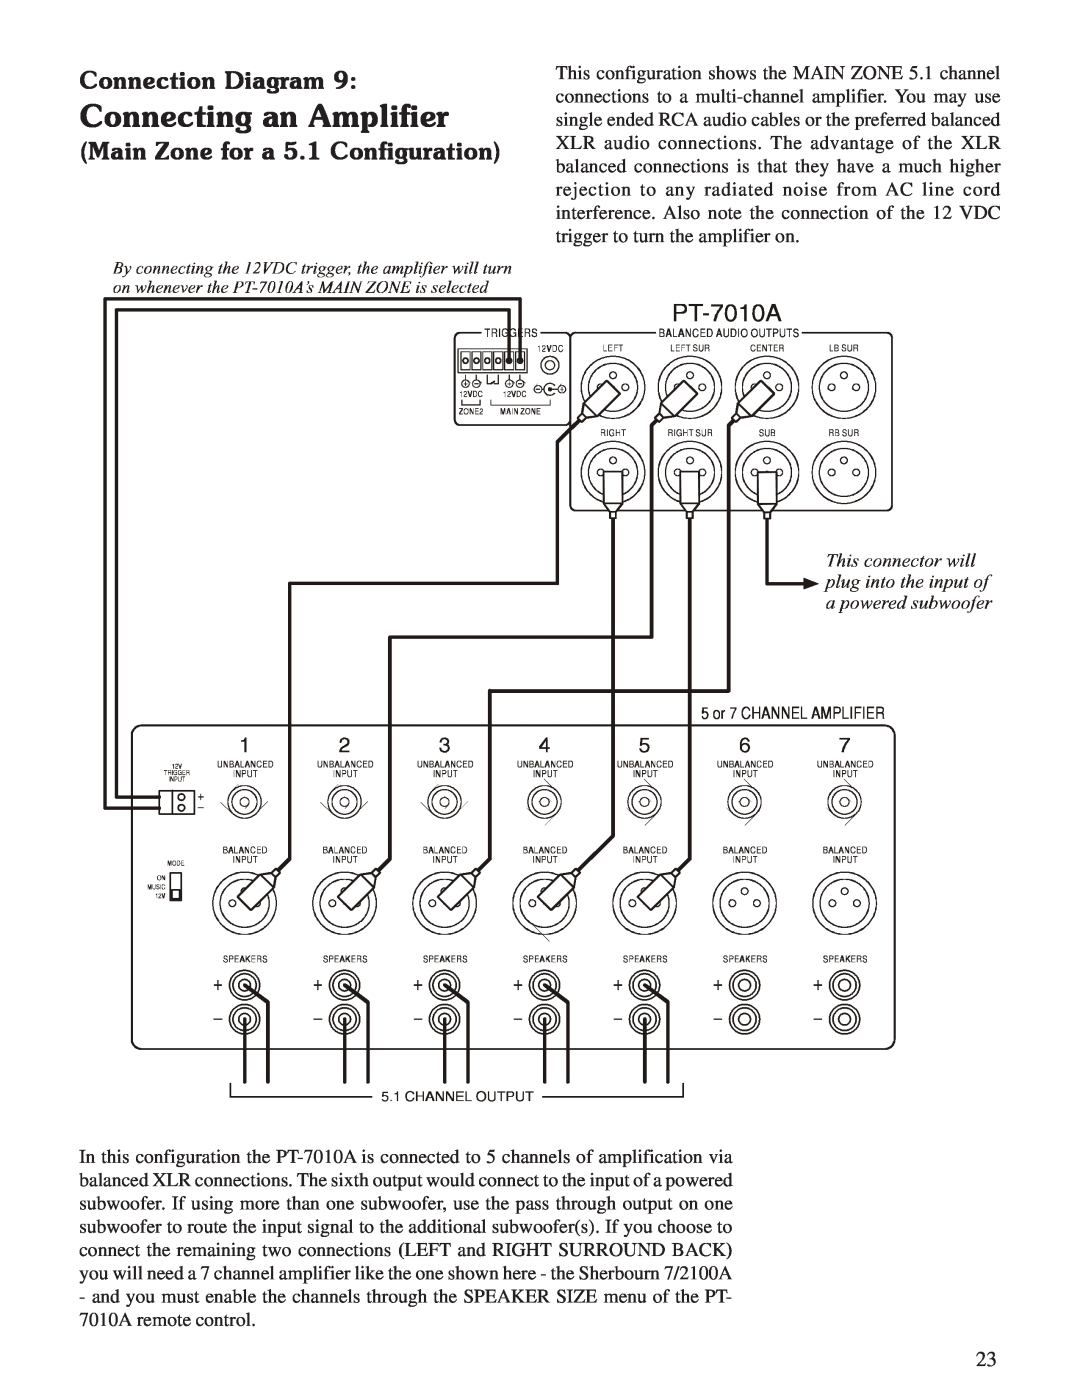 Sherbourn Technologies PT-7010A owner manual Connecting an Amplifier, Main Zone for a 5.1 Configuration, Connection Diagram 